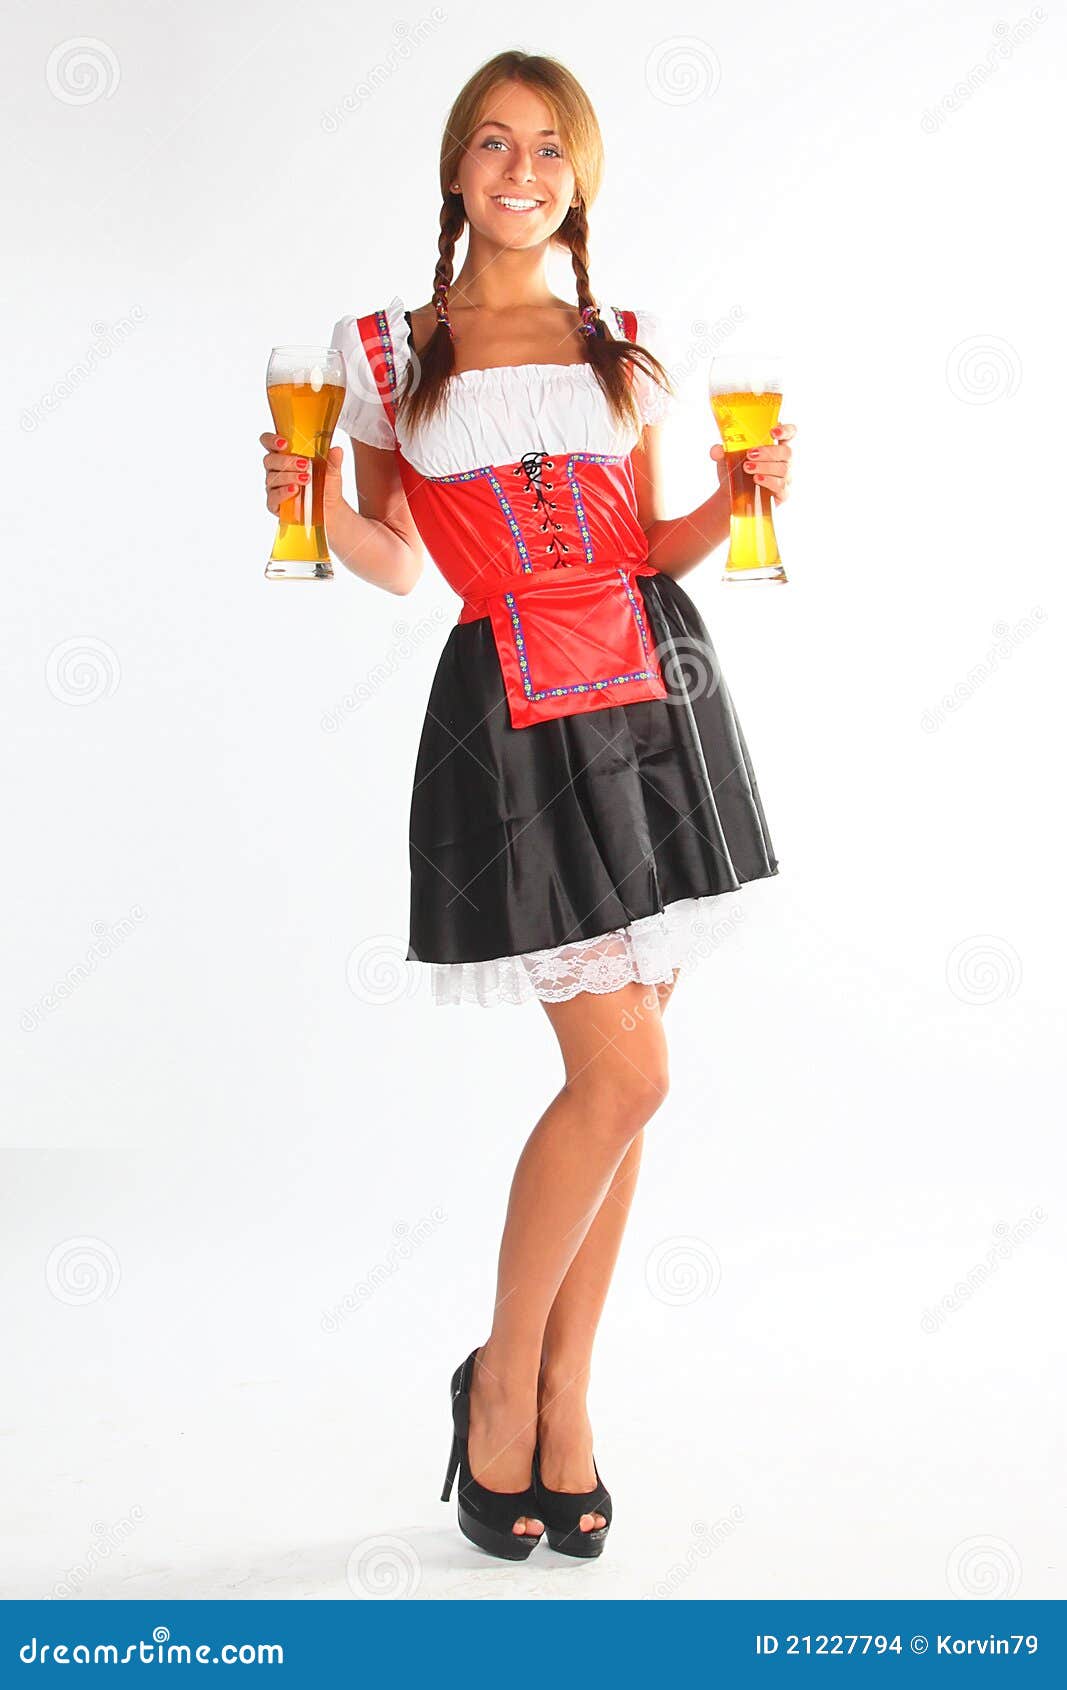 The Girl in a Traditional Bavarian Dress Stock Photo - Image of mood ...